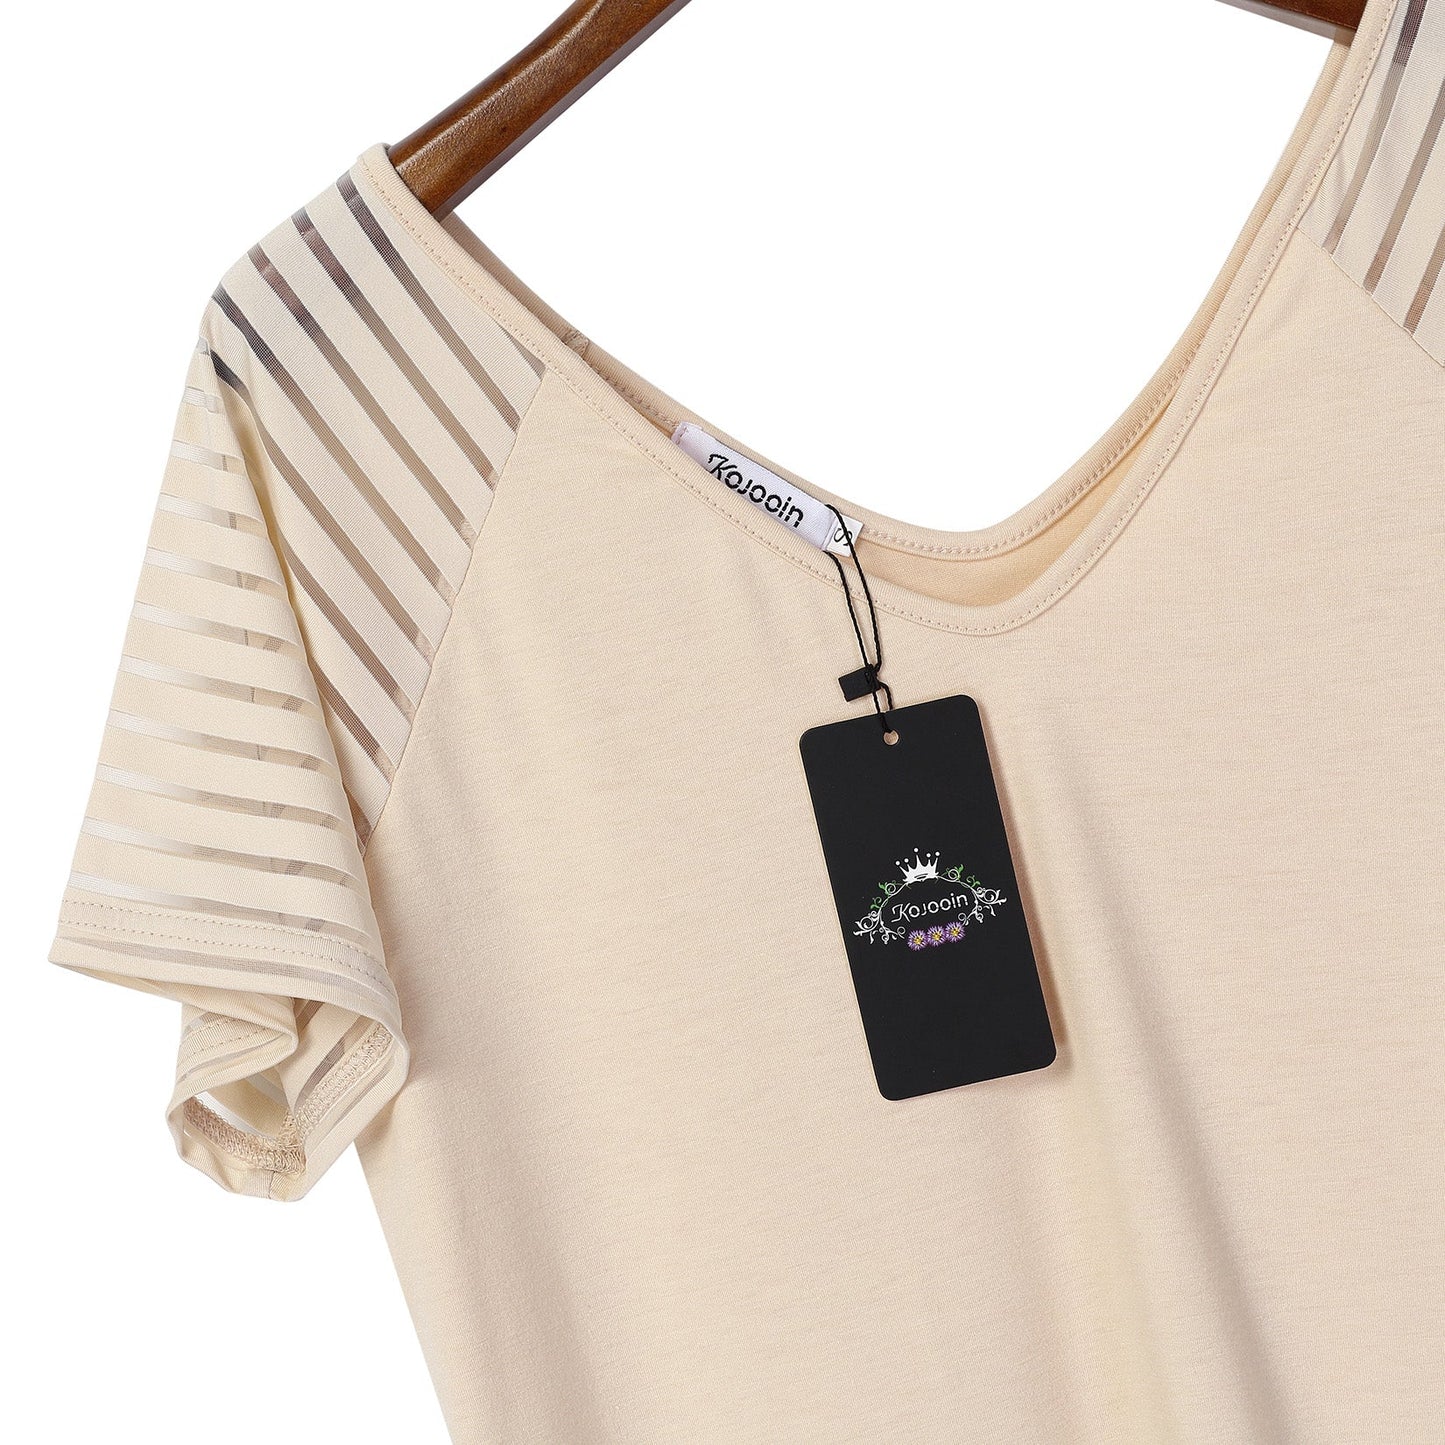 YESFASHION Sheer Sleeve Top Casual Panel V-Neck T-Shirt Apriot